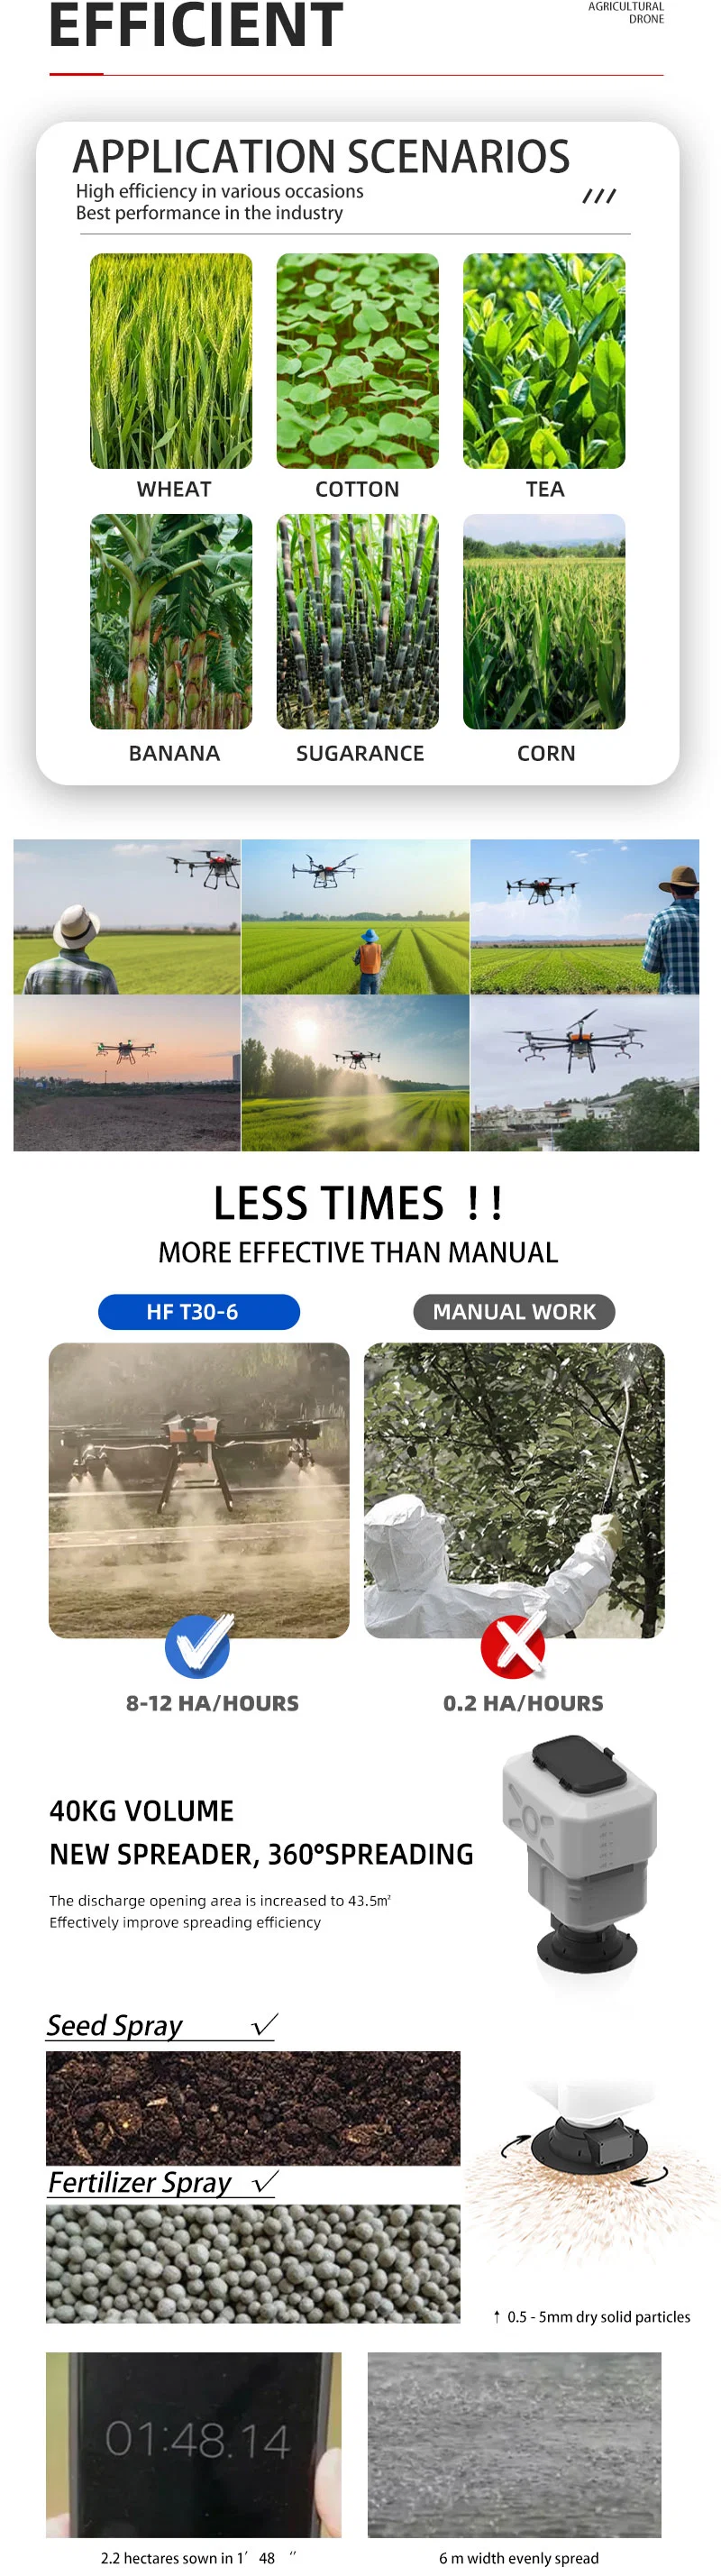 4-9 M Spray Width 8L/Min 30 LTR Large Capacity Uav Spray Spread Sow Smart Agricultural Drone for Seed Fertilizer Fish Food Spread